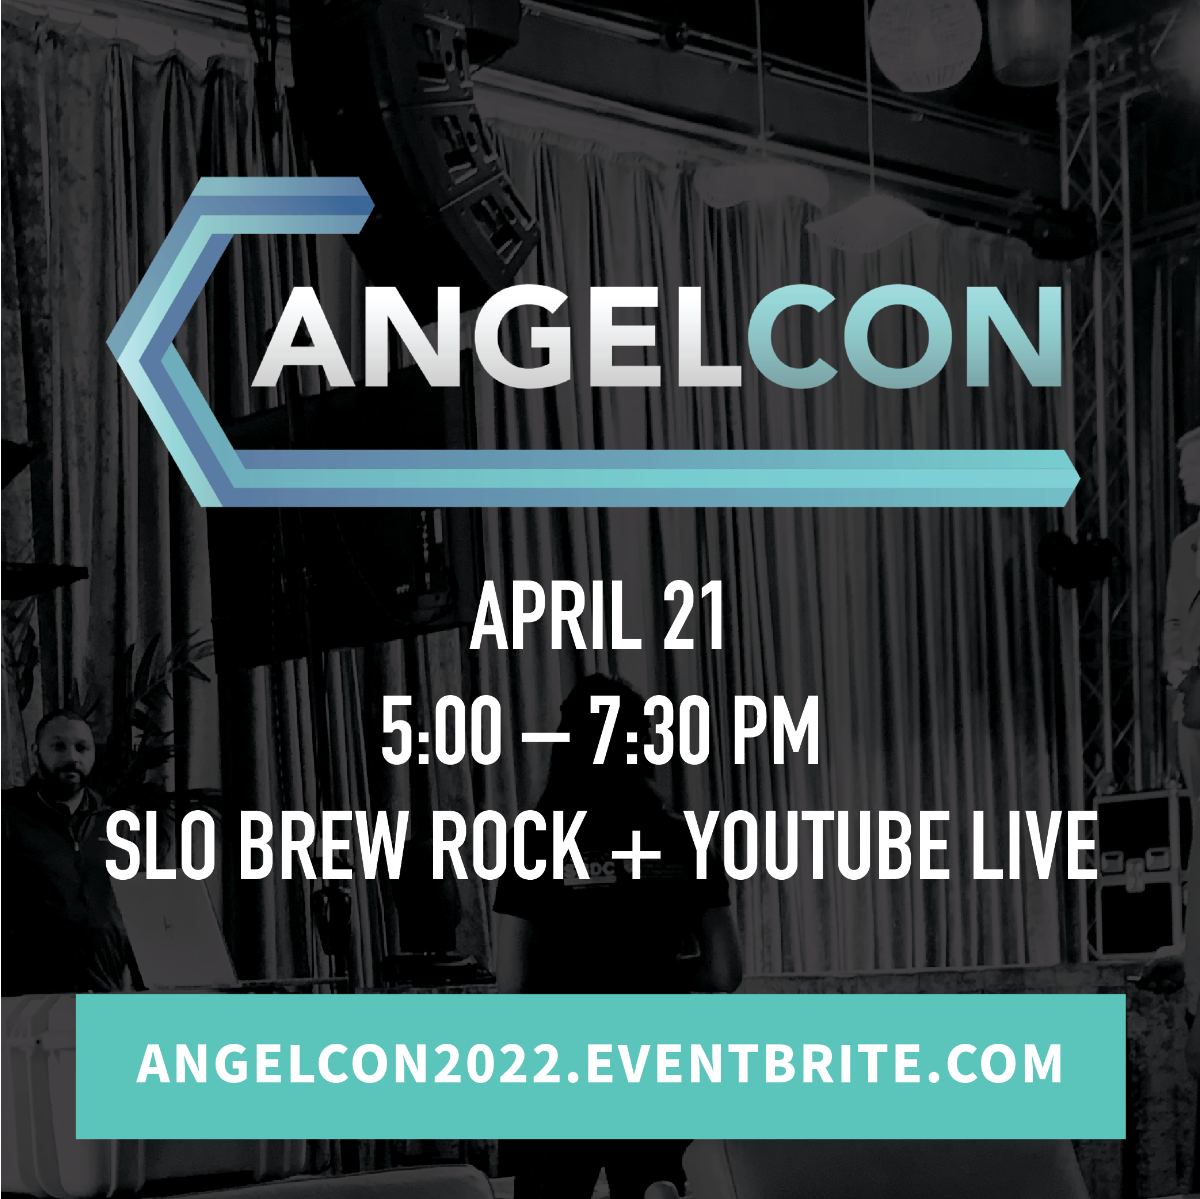 AngelCon logo, times, access information and reservation link